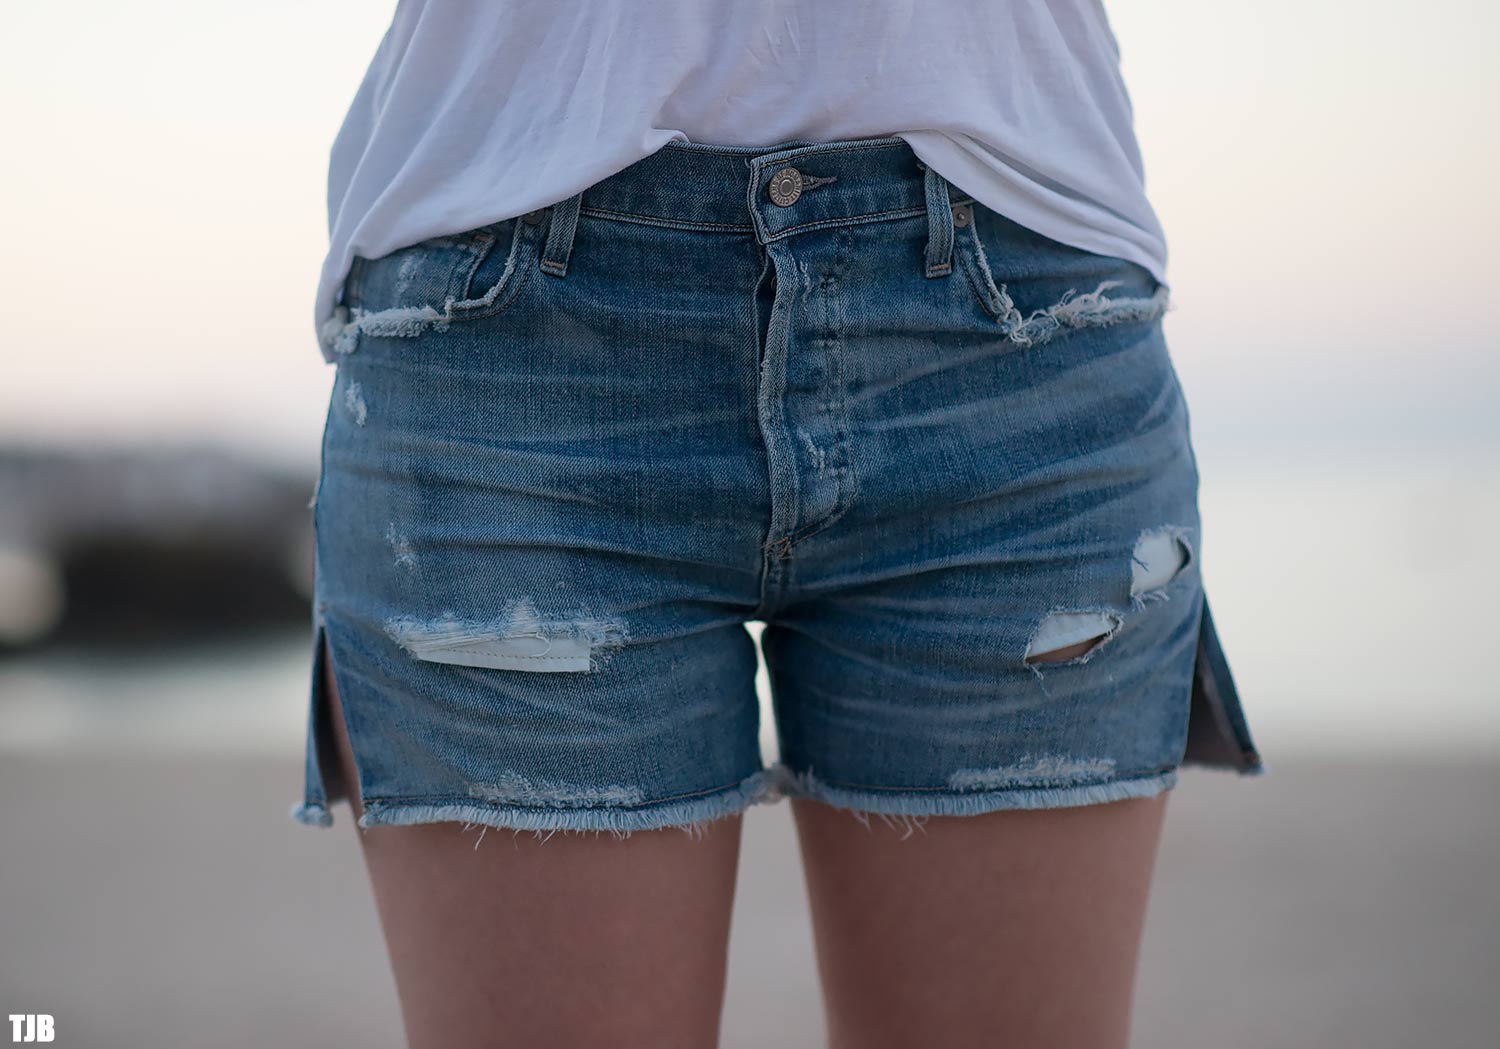 Authentic Second Hand Citizens of Humanity CutOff Denim Shorts  PSSB4800007  THE FIFTH COLLECTION